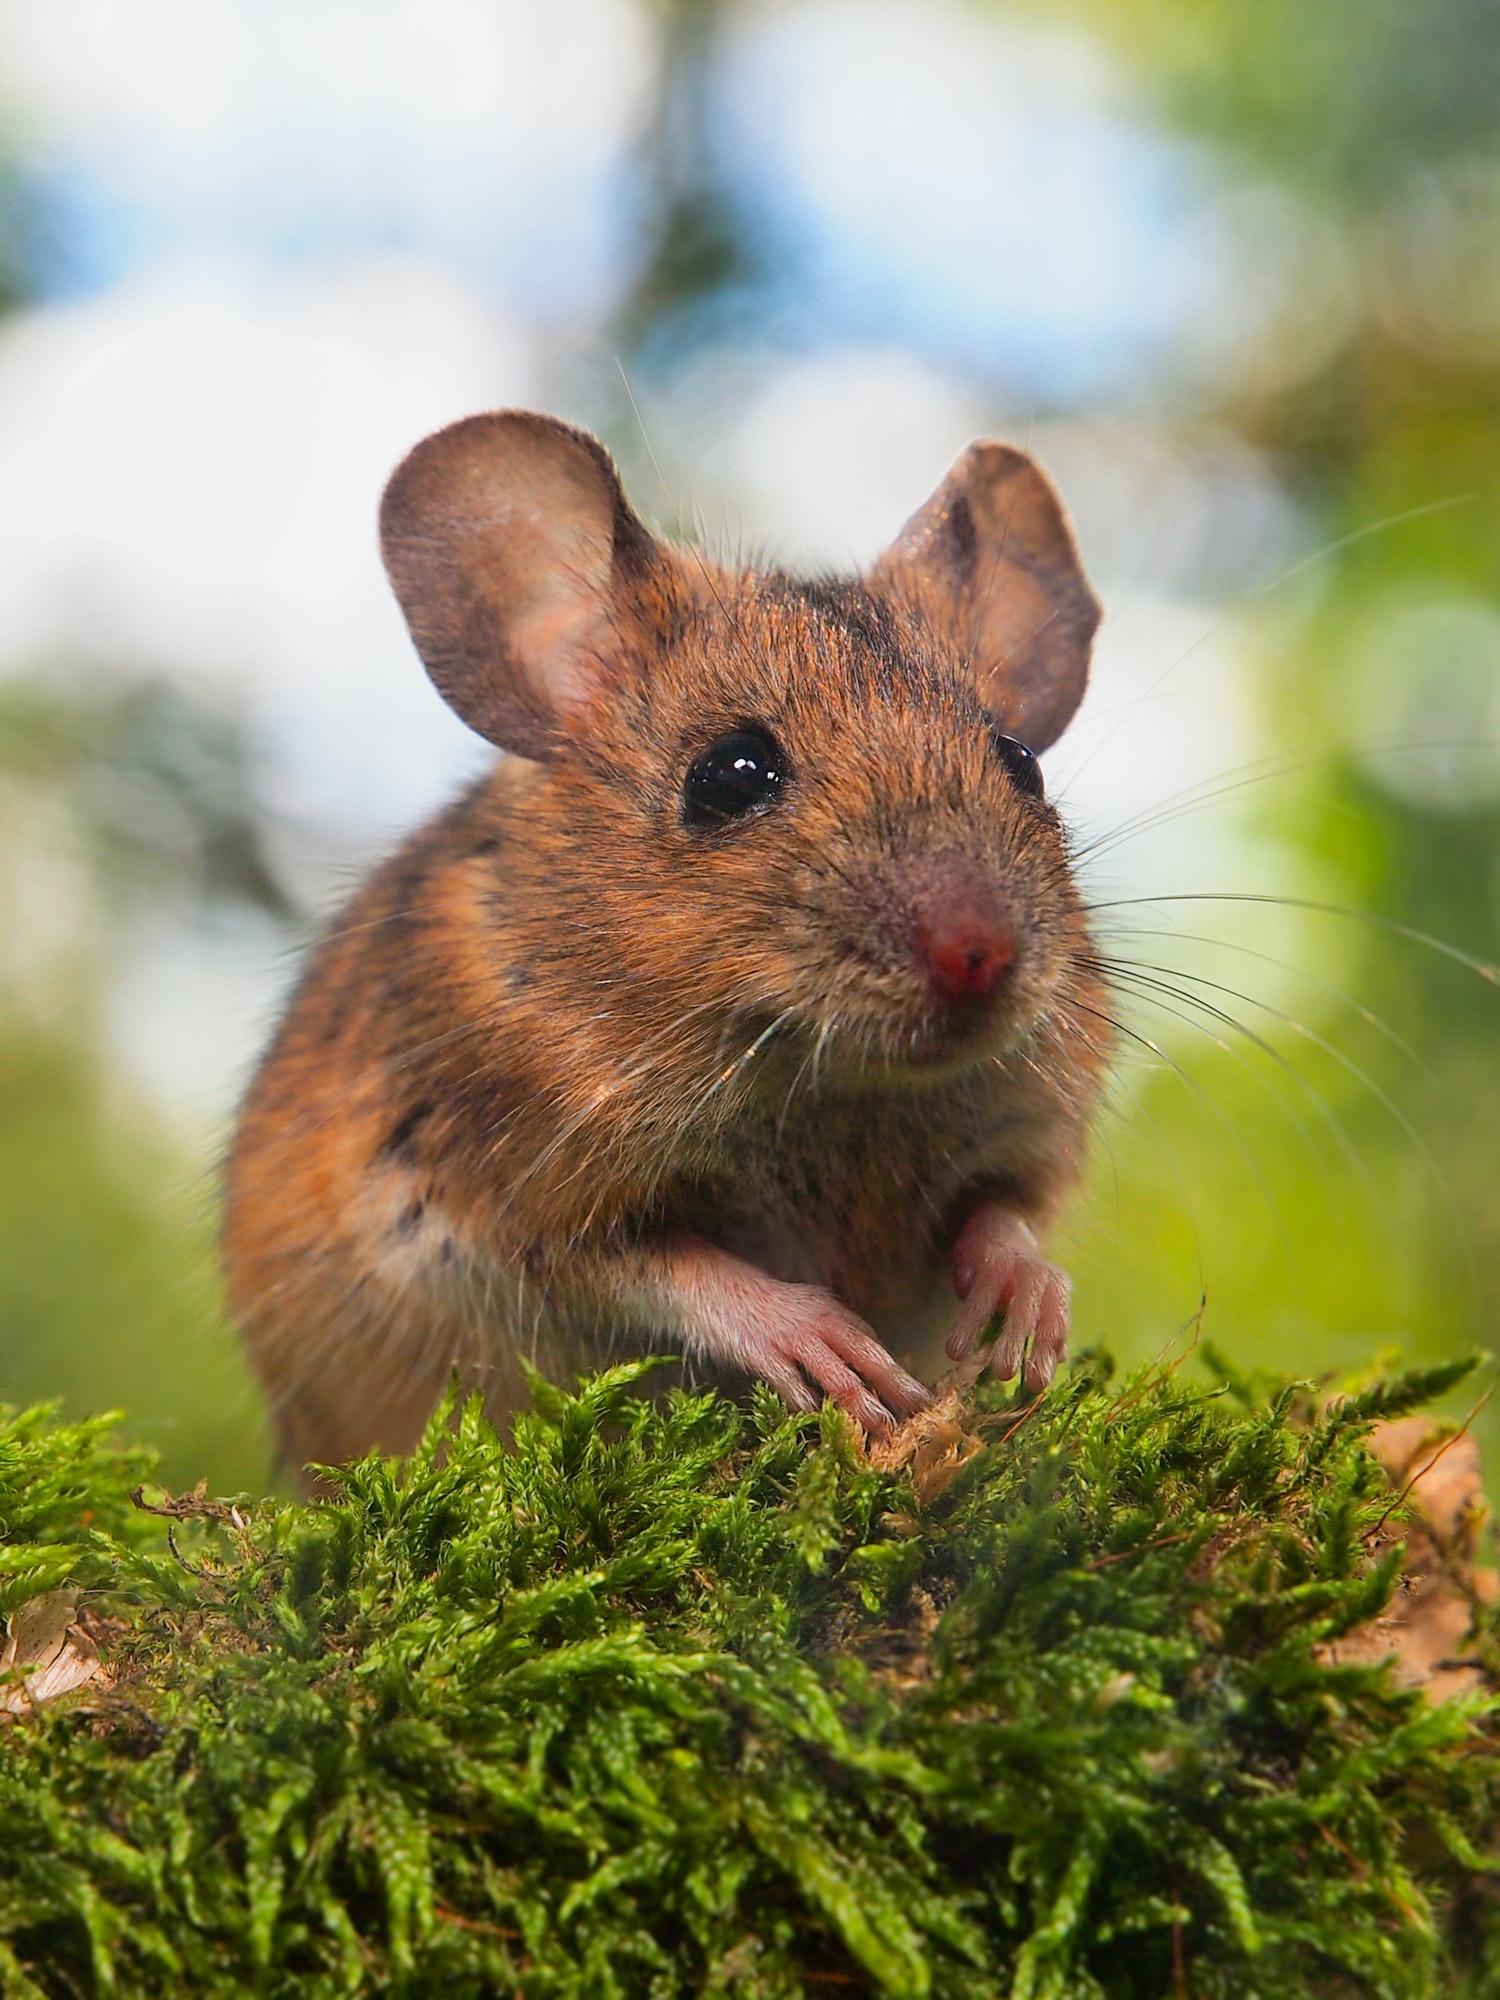 Field Mouse (Apodemus sylvaticus) in a forest